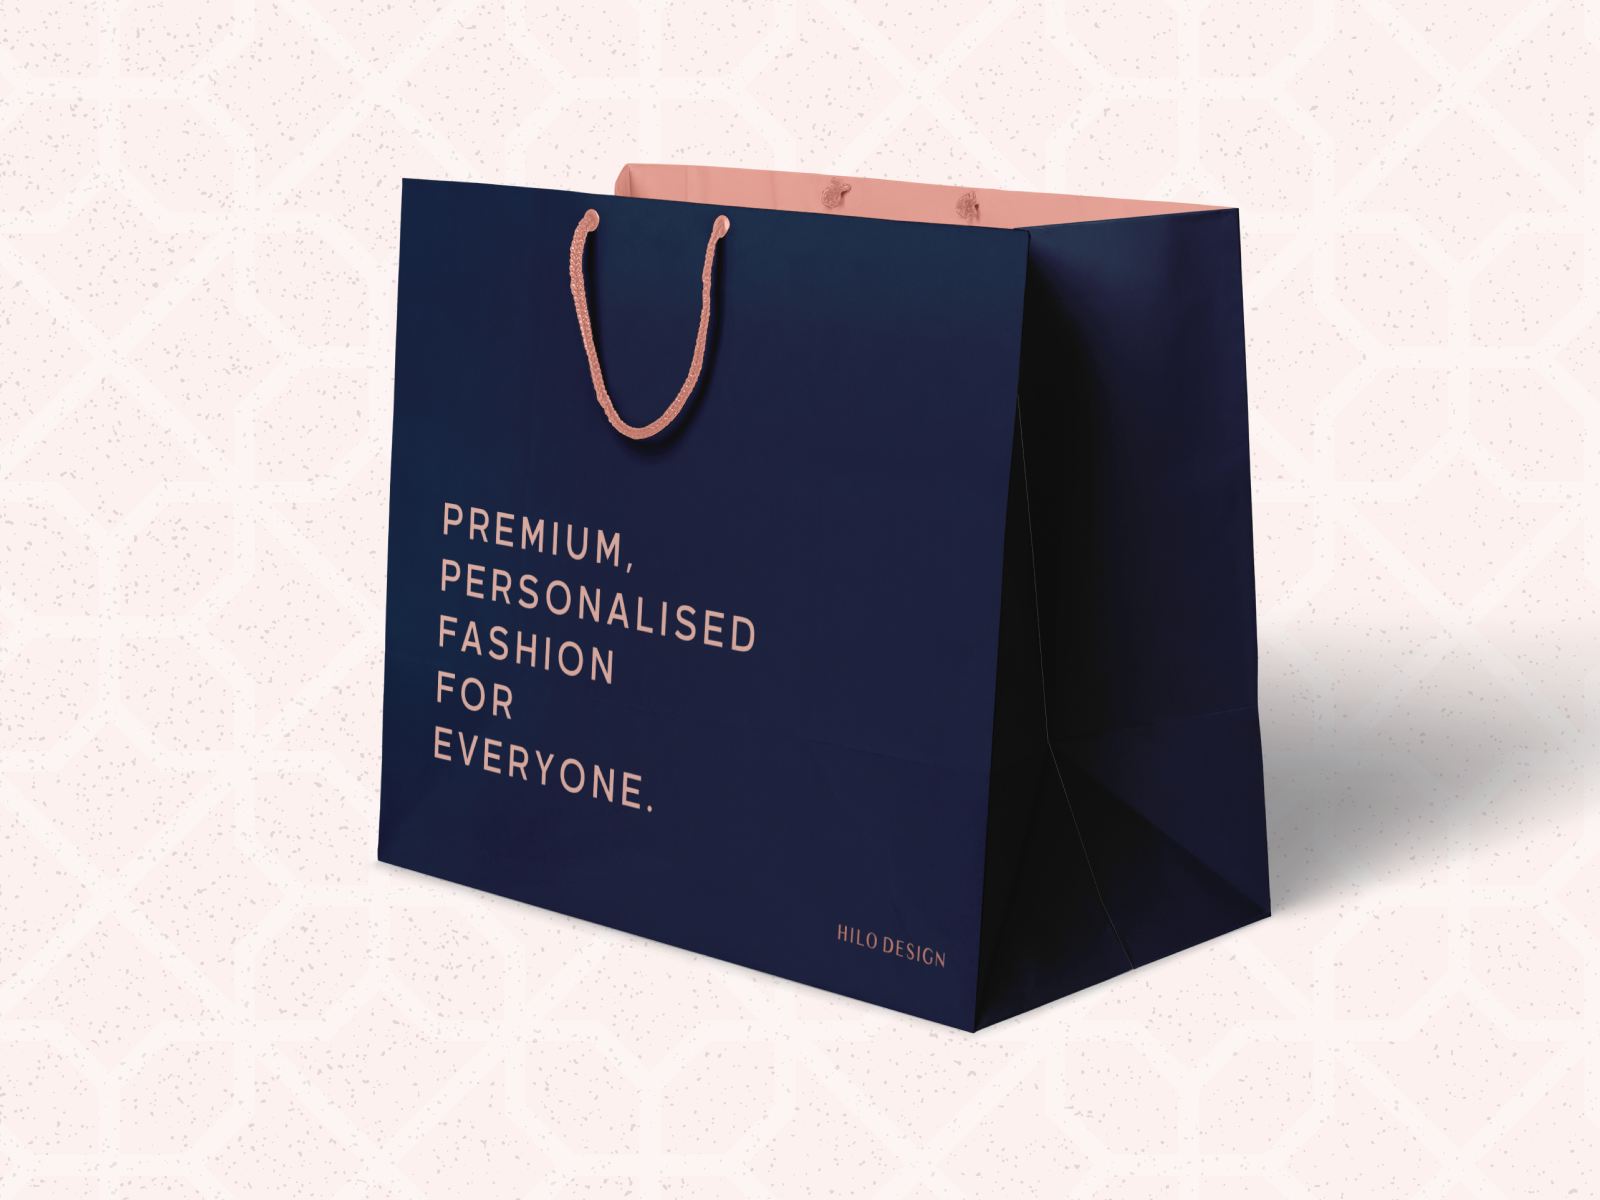 Shopping bag design by Studio Super/Right on Dribbble